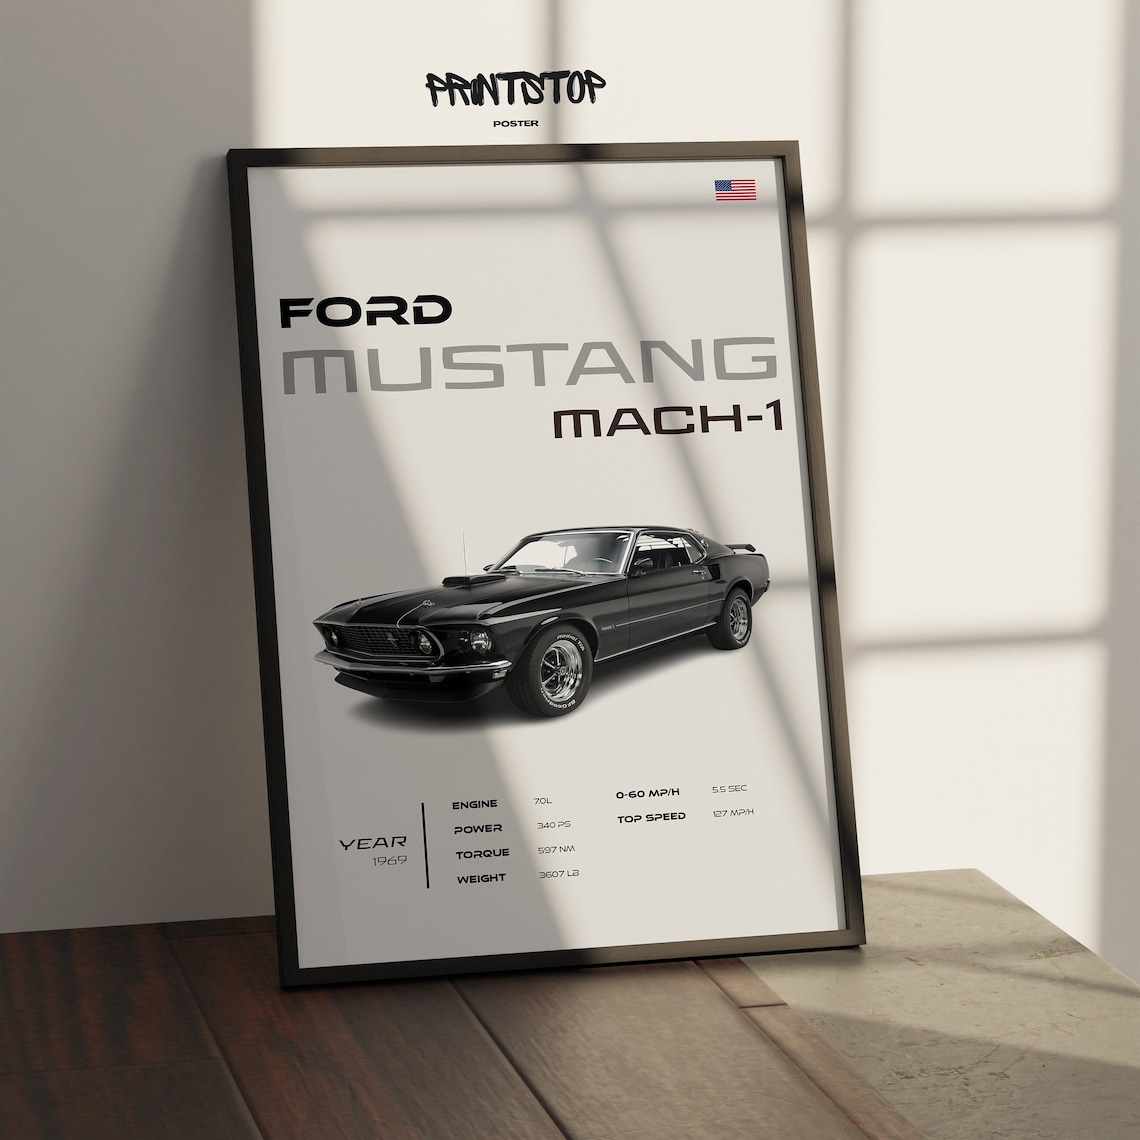 1969 Ford Mustang Mach-1 Poster Classic American Muscle Car - Etsy Canada